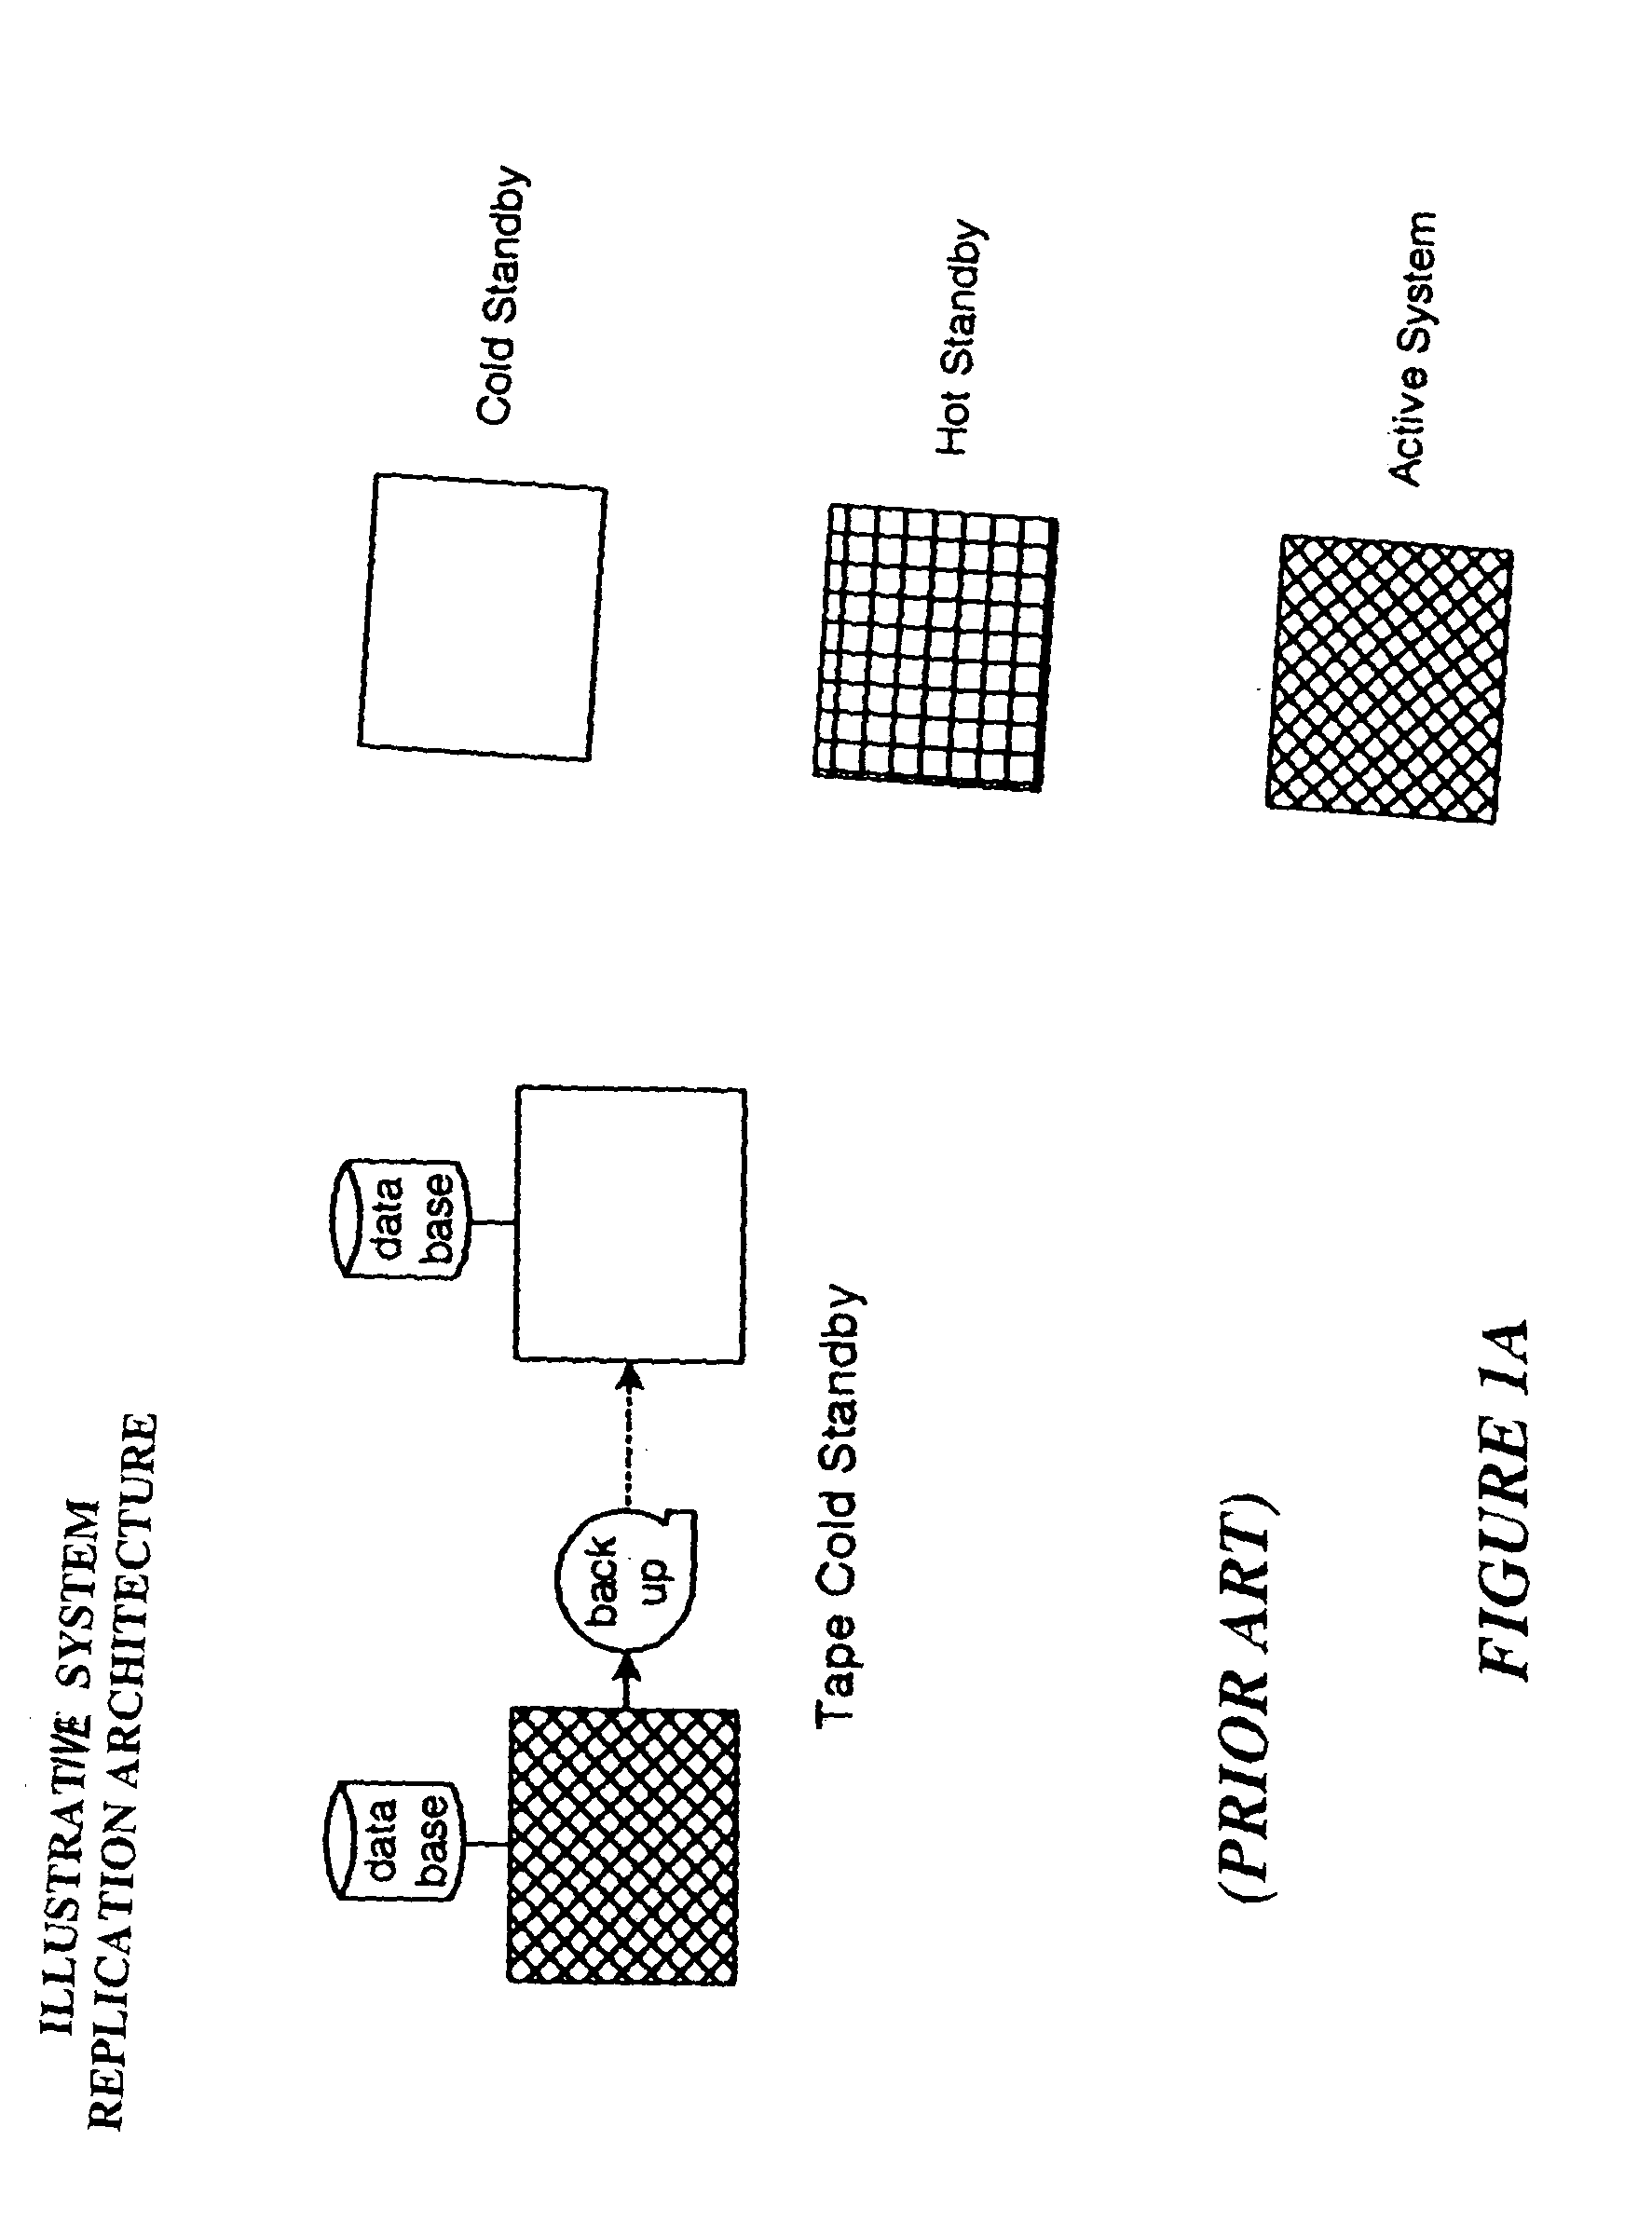 Method for ensuring referential integrity in multi-threaded replication engines